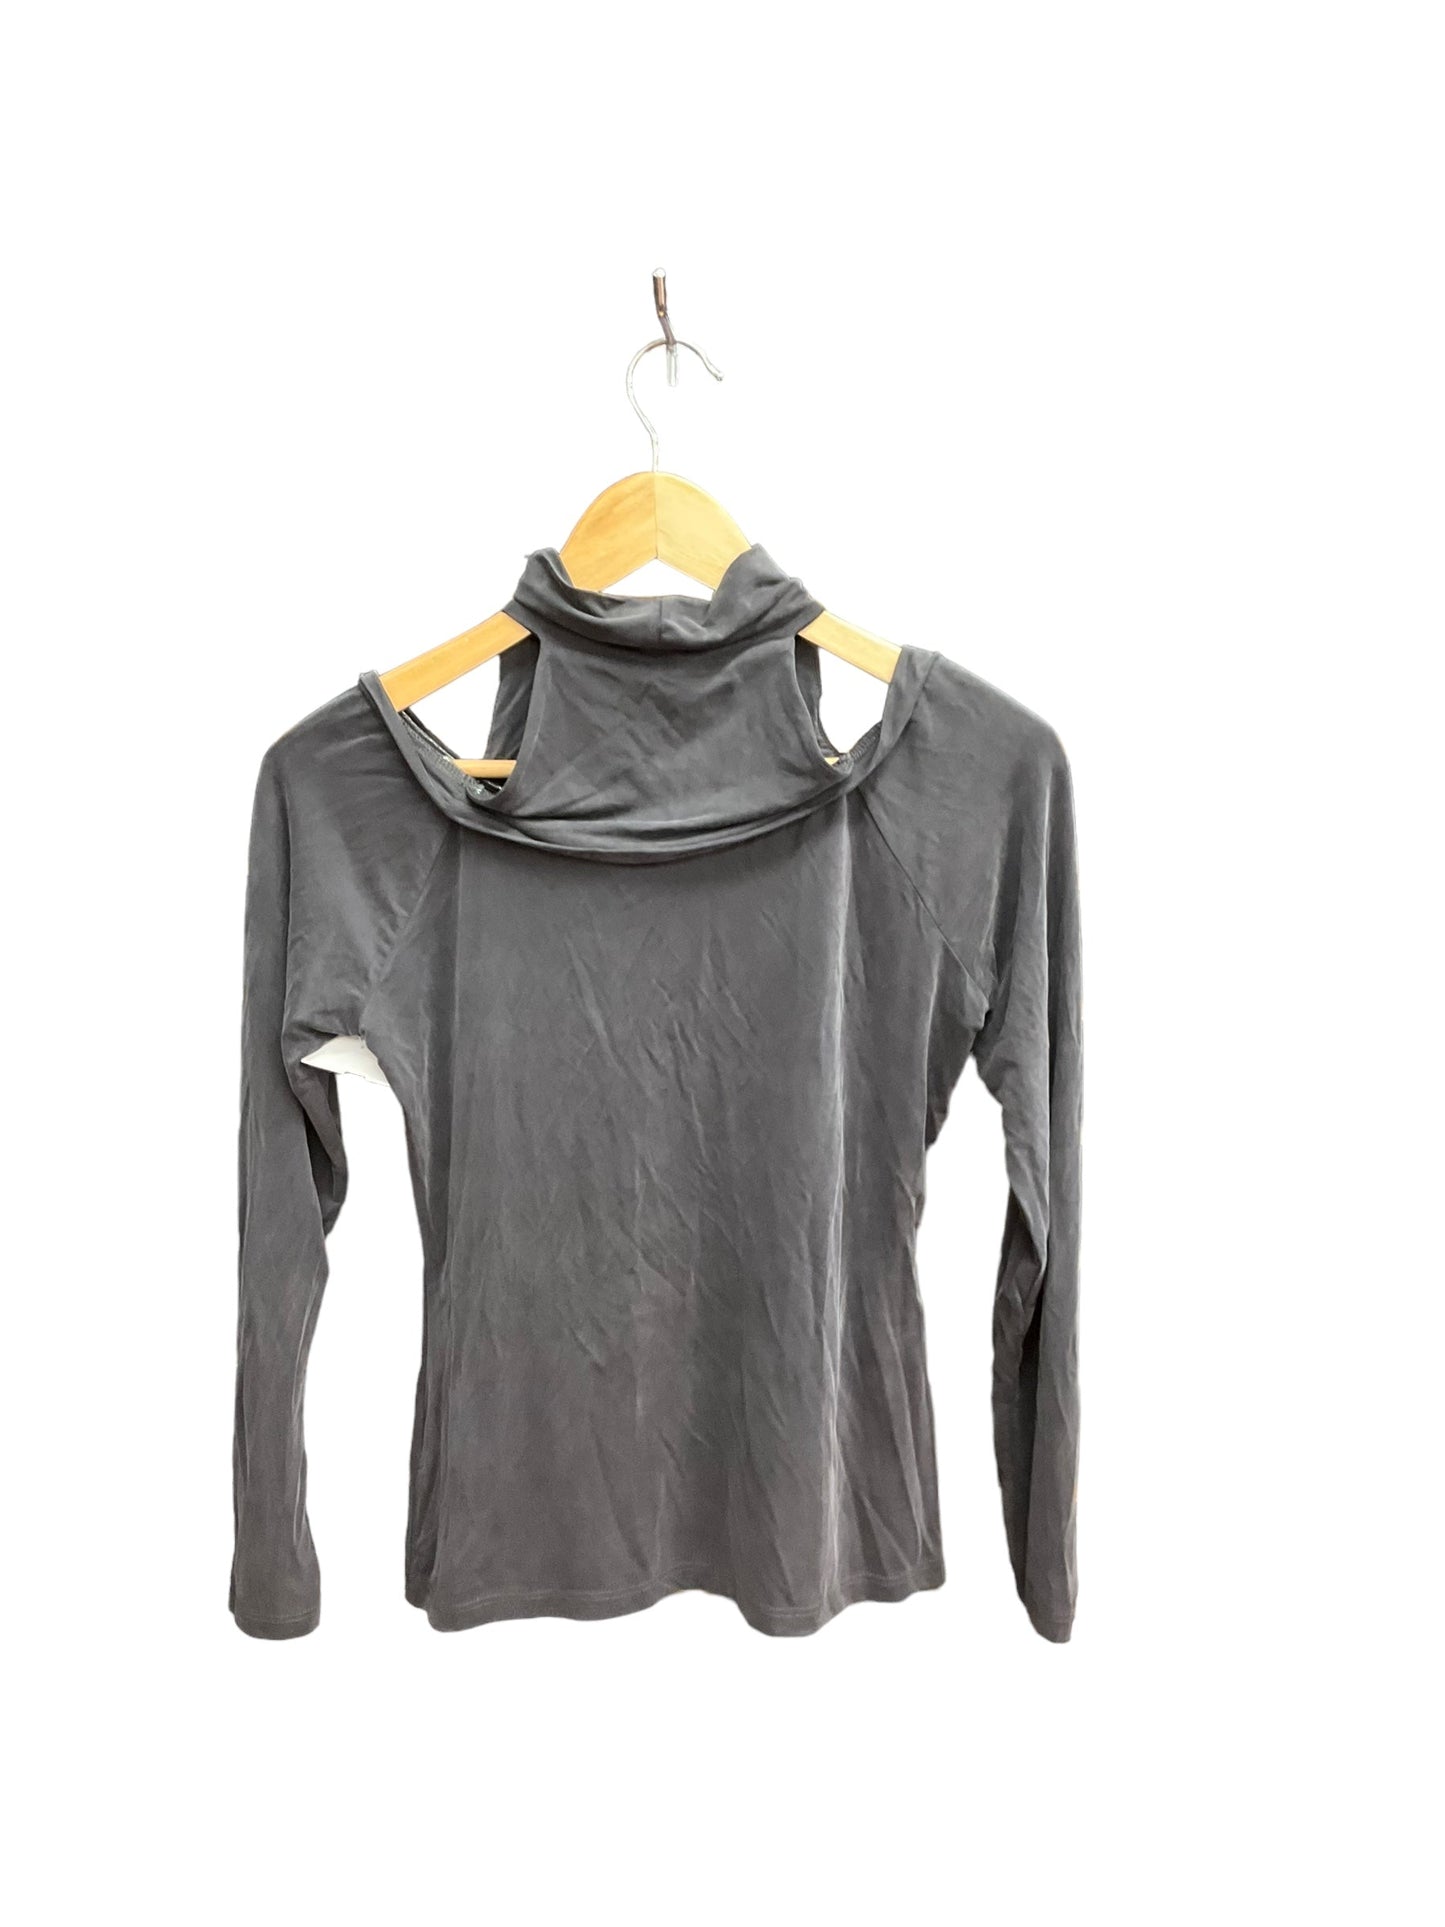 Grey Top Long Sleeve Cmb, Size S